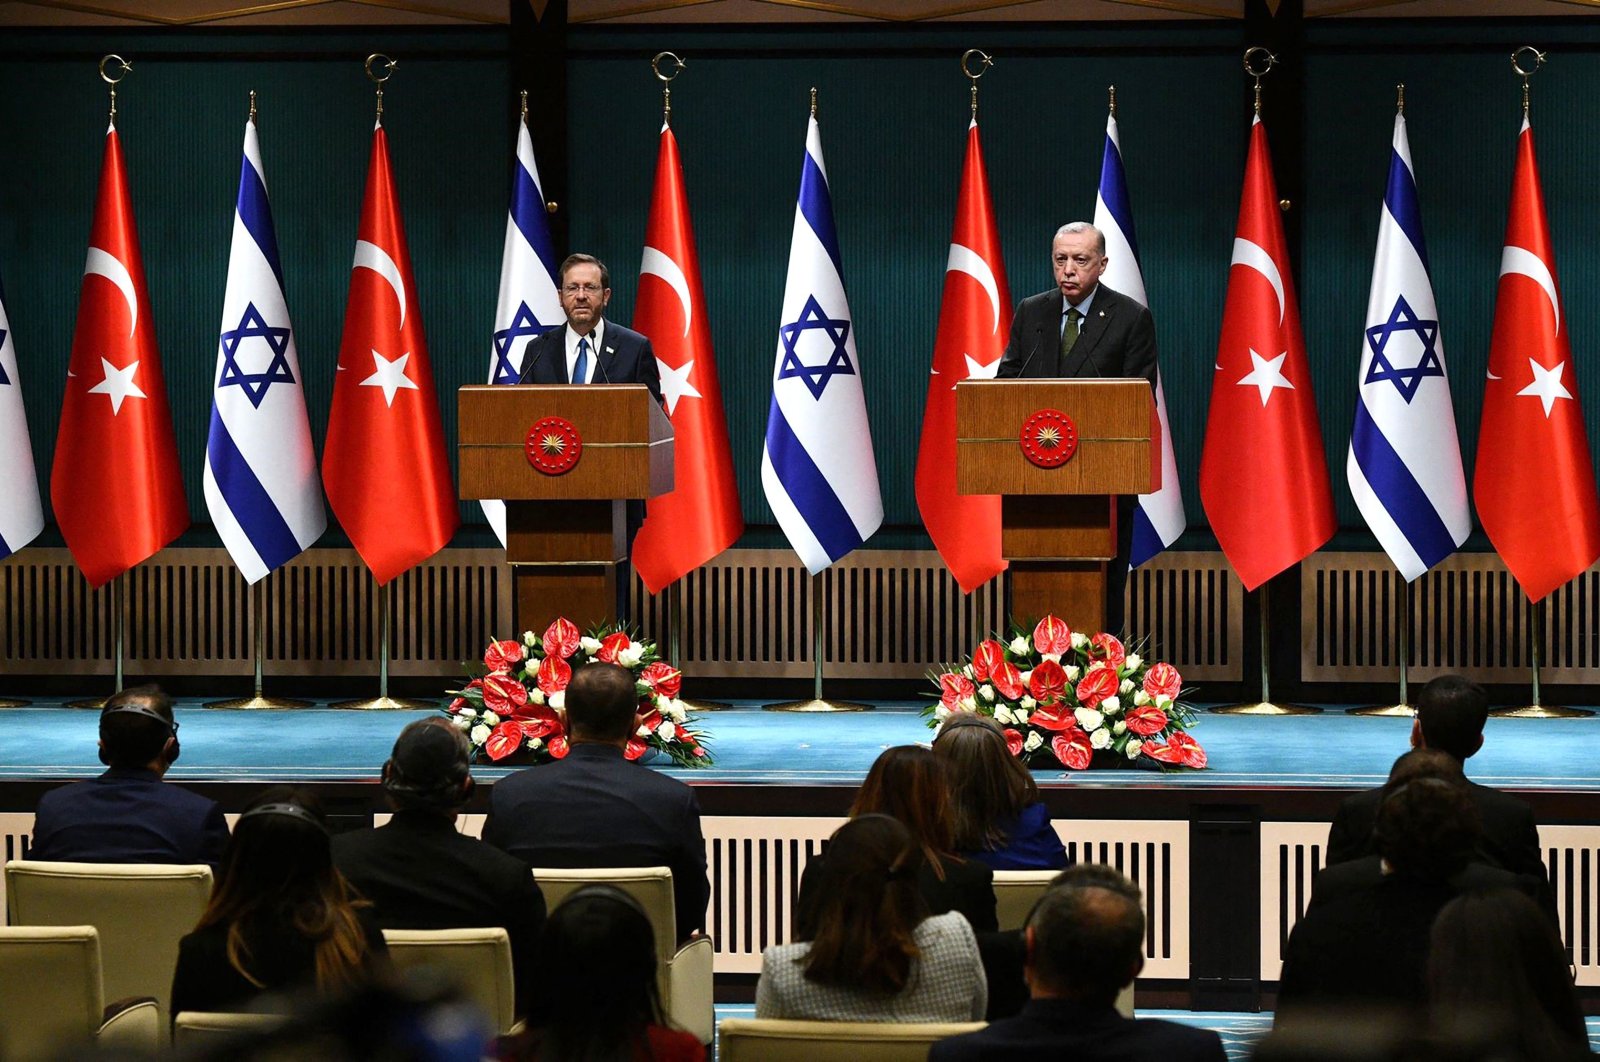 President Recep Tayyip Erdoğan and Israeli President Isaac Herzog give a joint press conference in the capital Ankara, Turkey, March 9, 2022. (AFP Photo)